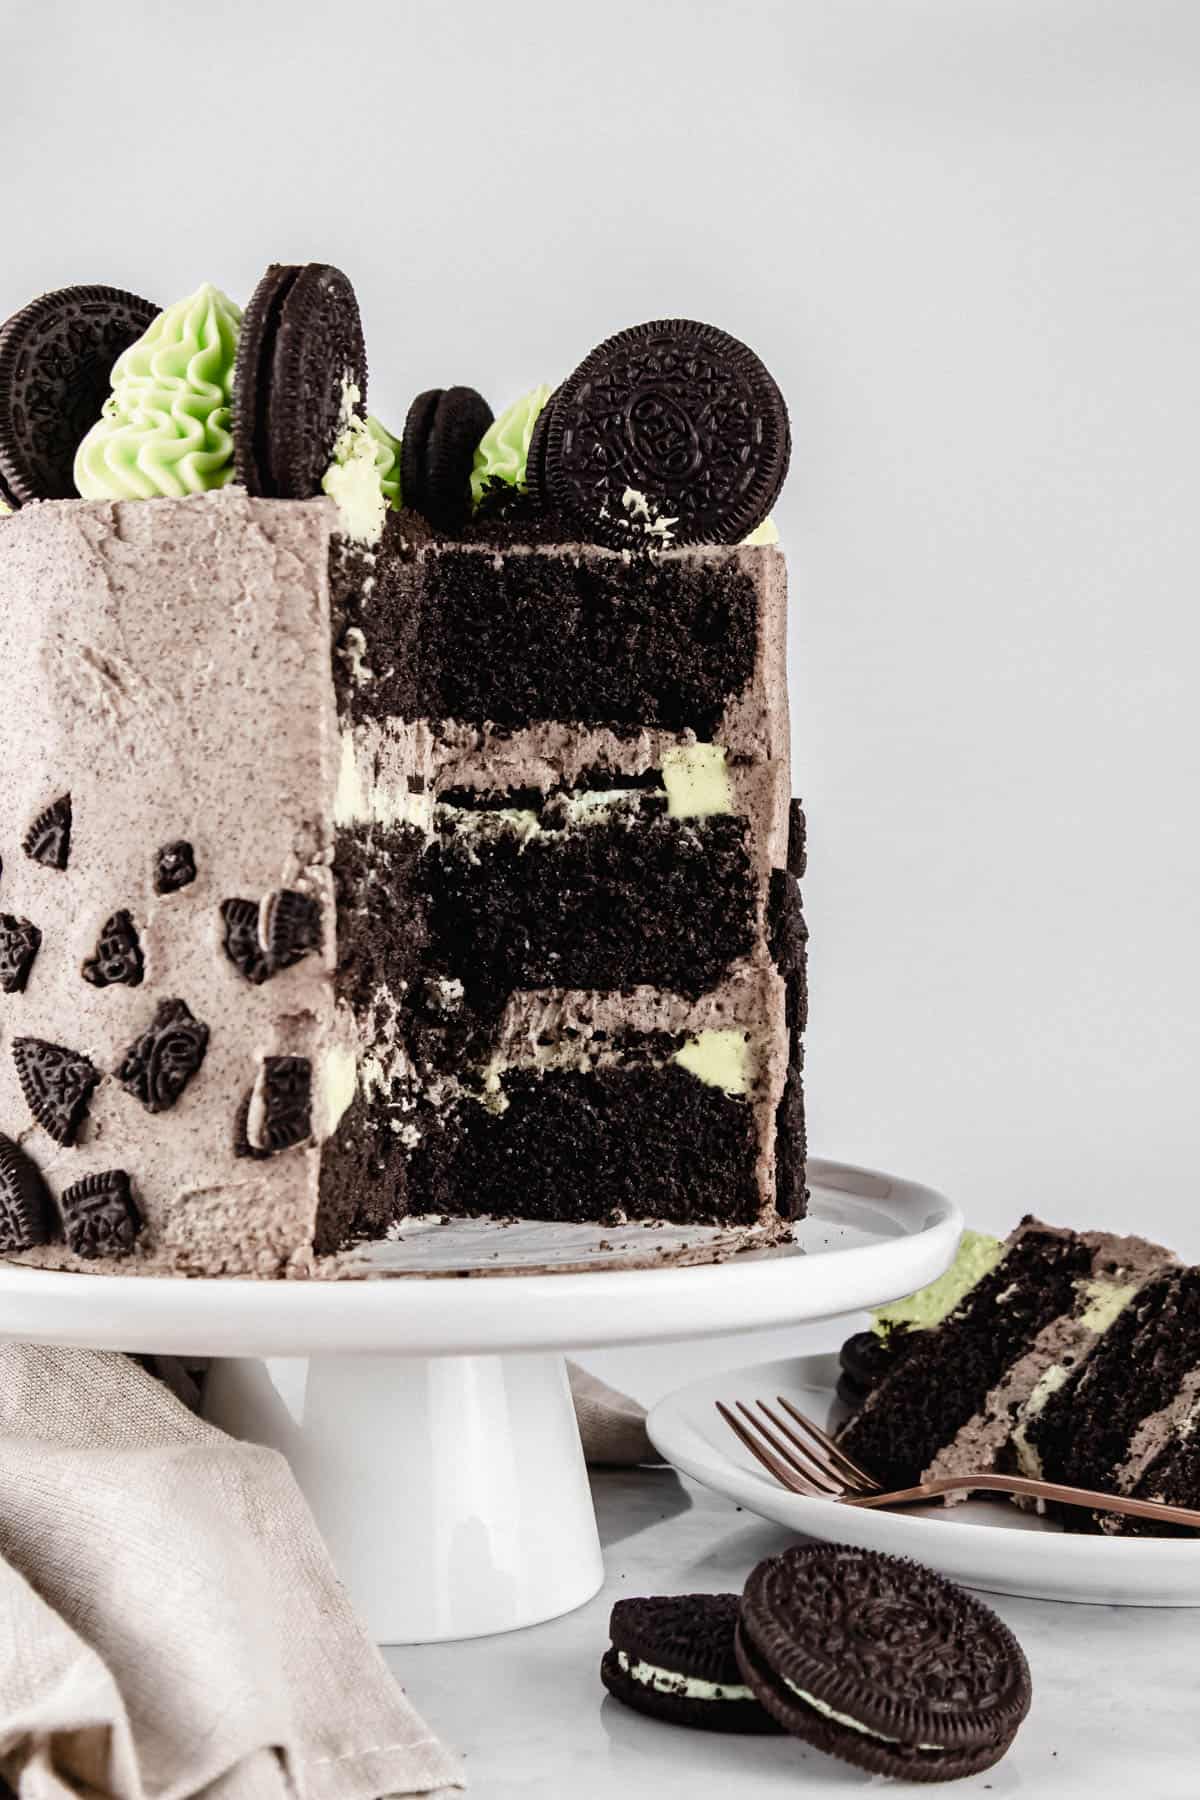 Mint Oreo cake on a white cake stand with a slice cut out